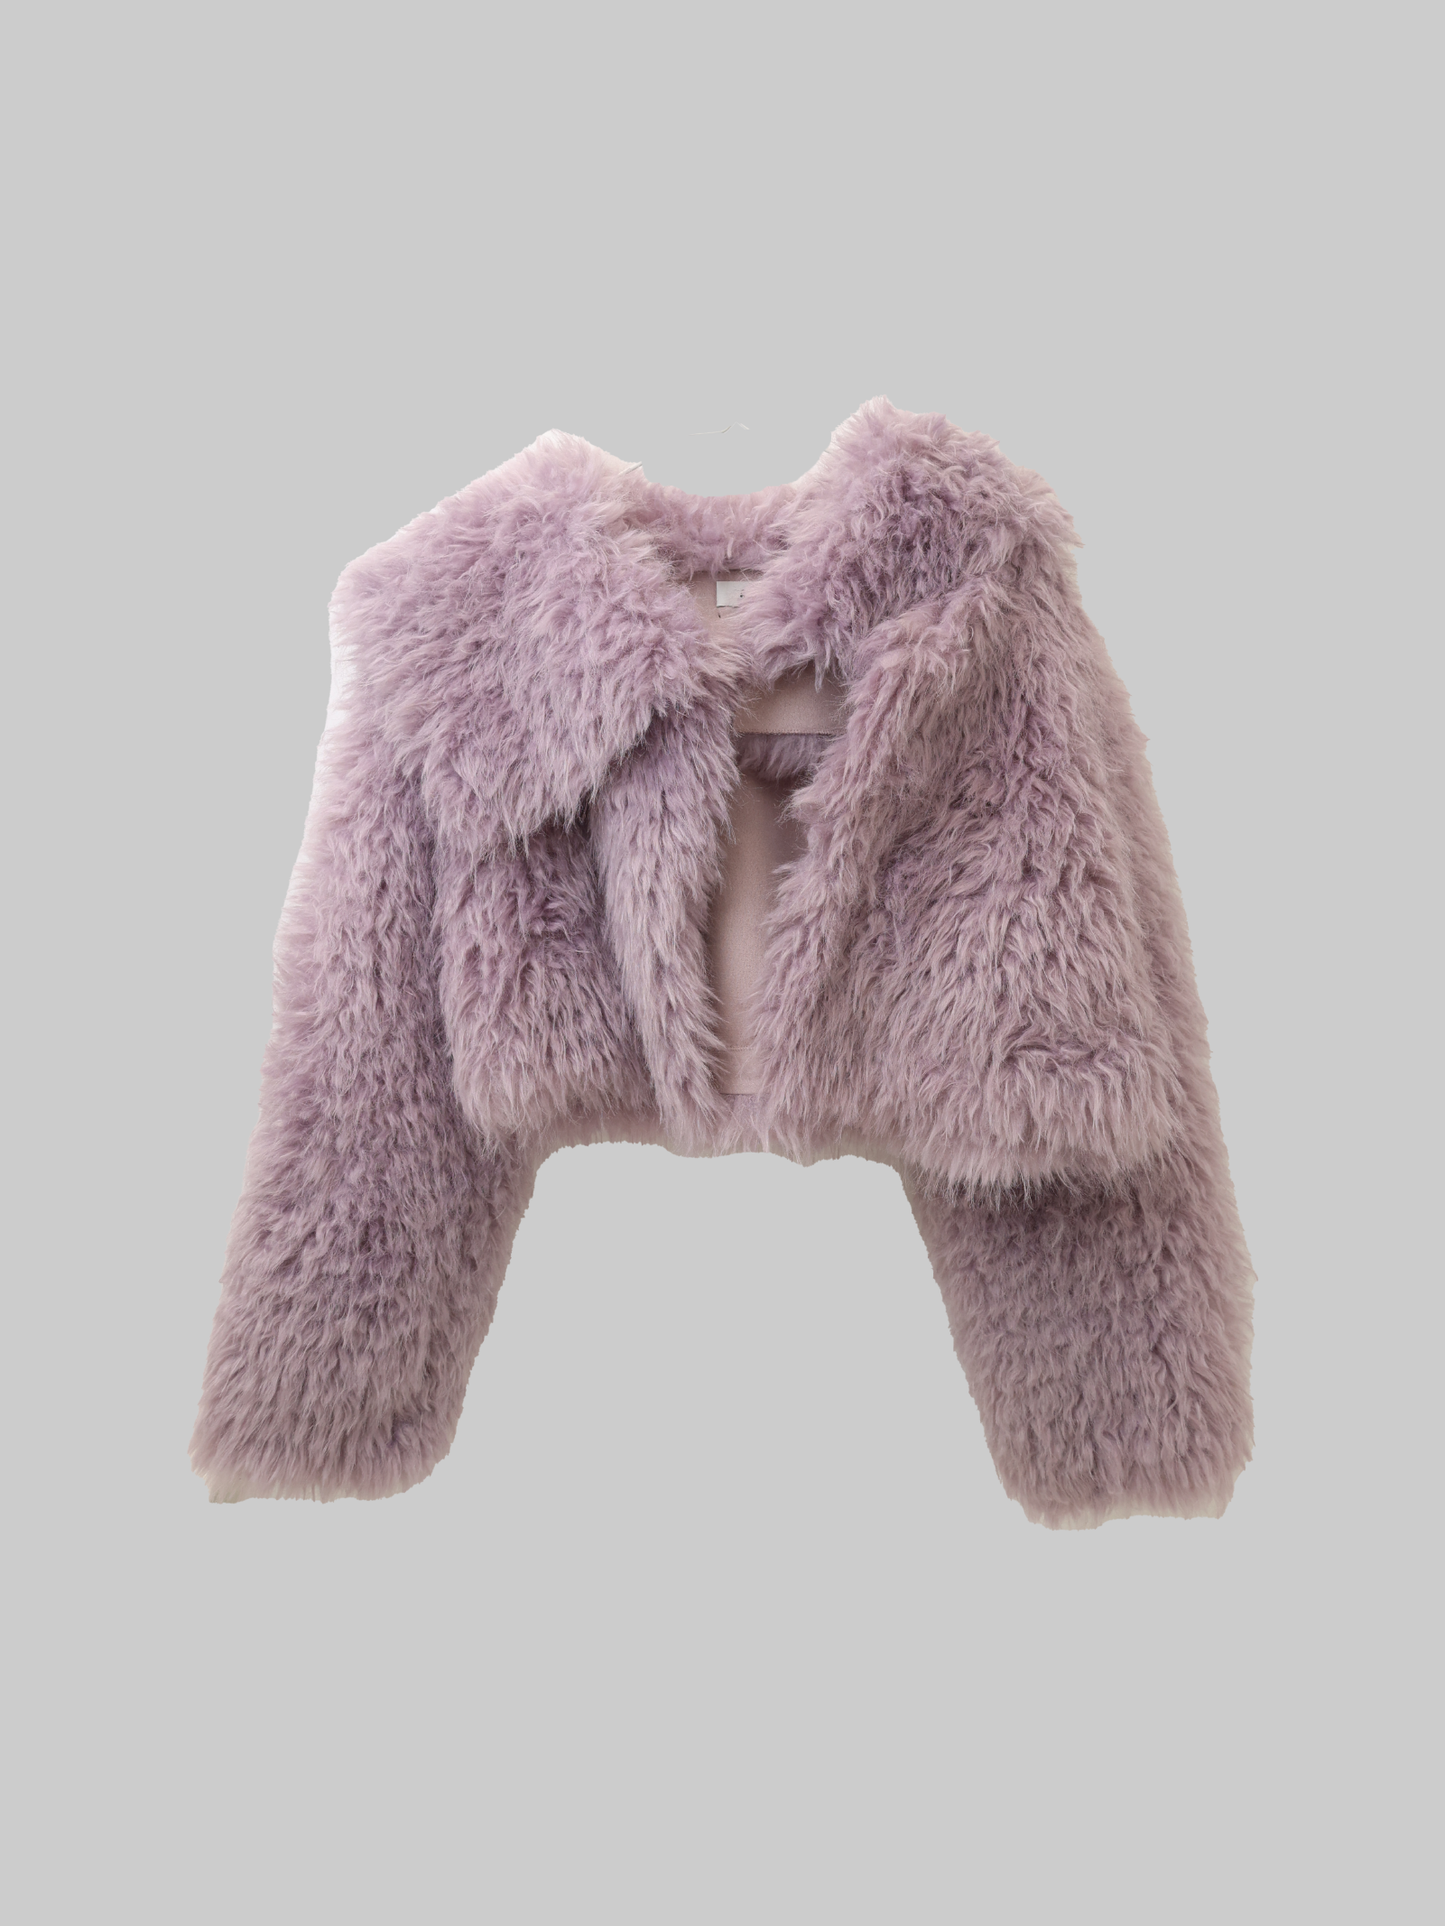 asuni Faux Fur Collar Evening Cape for party Coat in pink